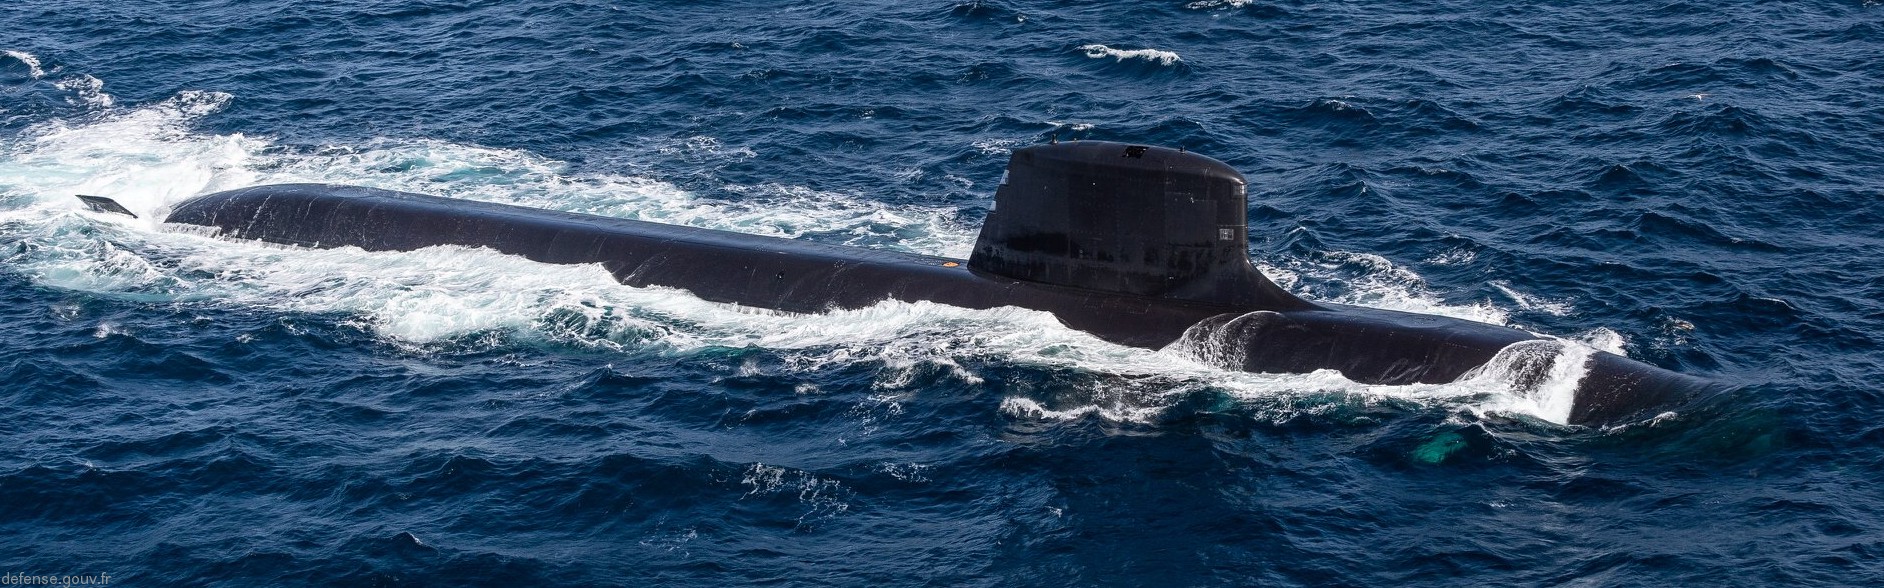 s-635 suffren barracuda class attack submarine french navy marine nationale sous-marin nucleaire d'attaque sna 04